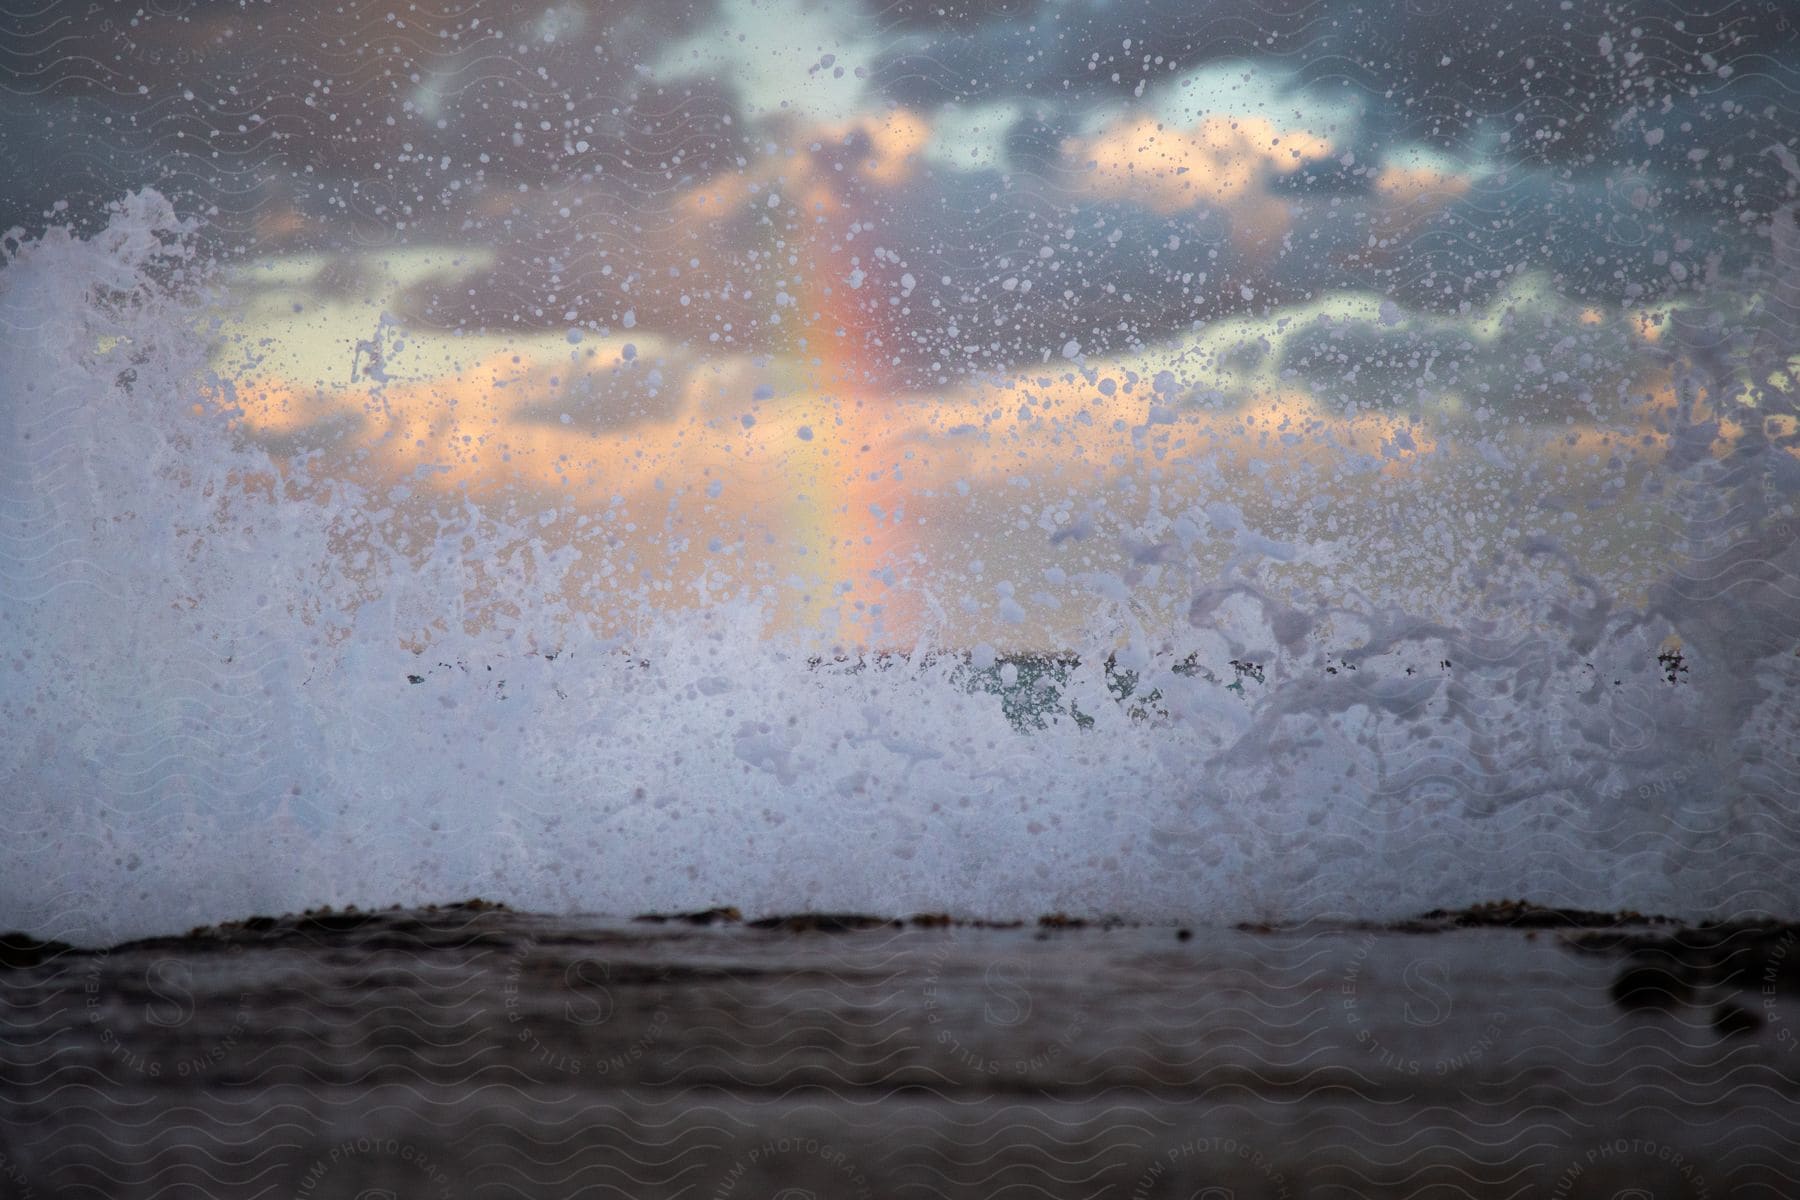 A landscape of ocean waves breaking against the shore with a rainbow in the distance